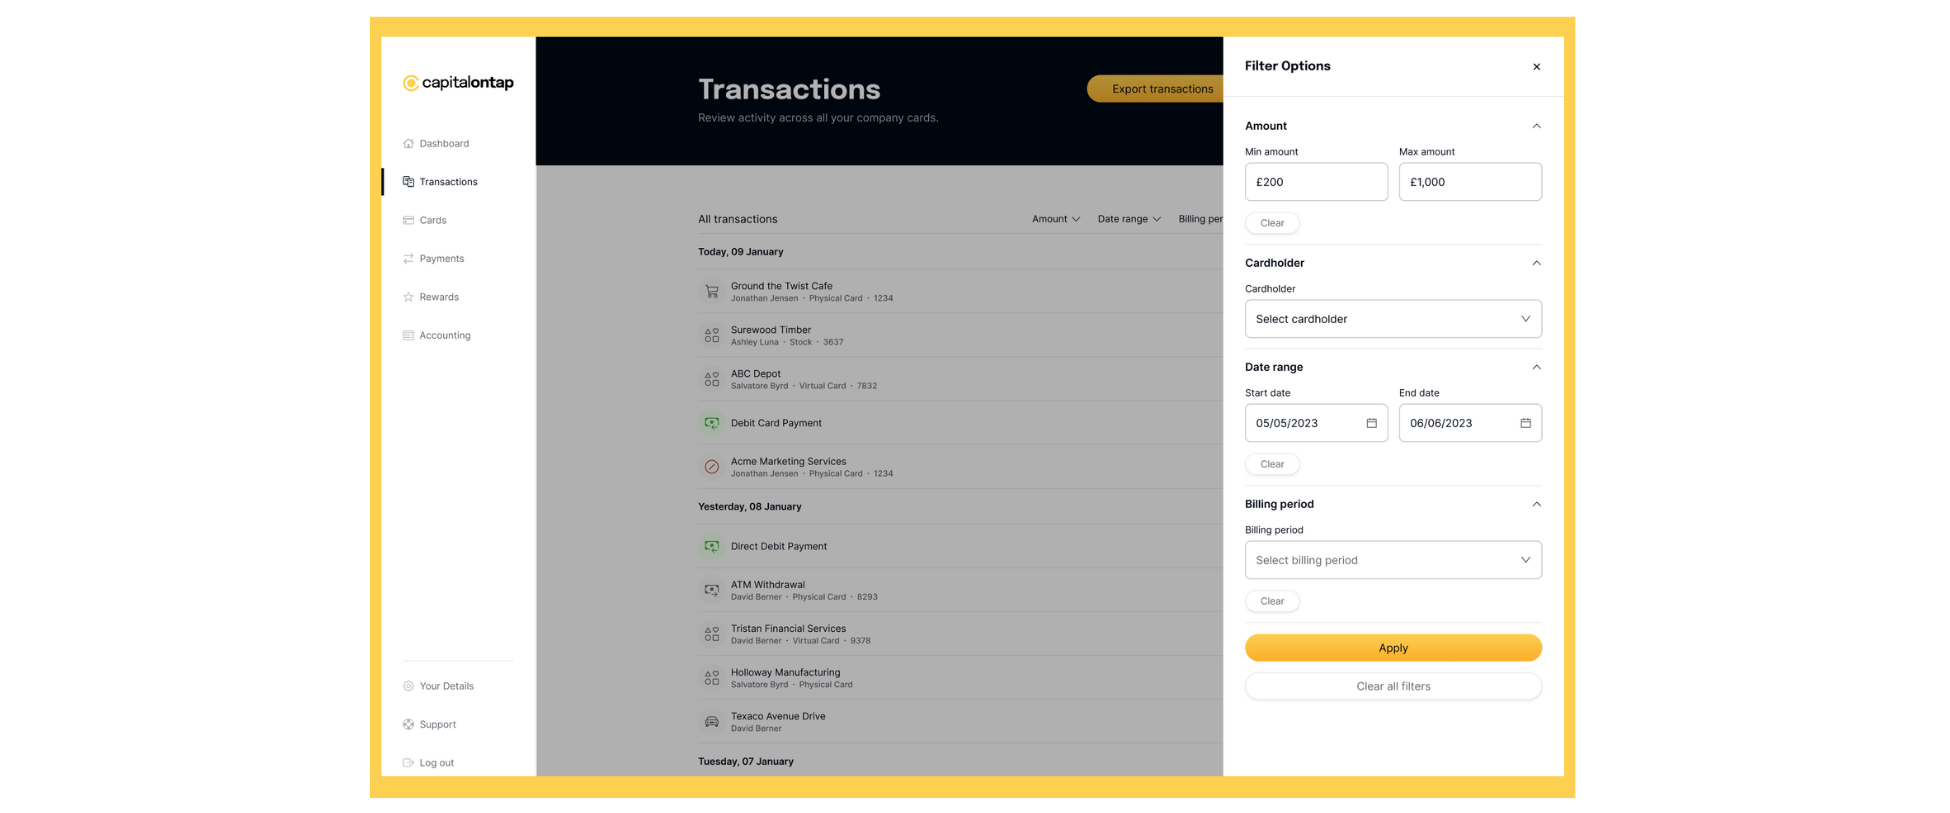 A screenshot of the filter options now available in the transactions page in Capital on Tap's online portal